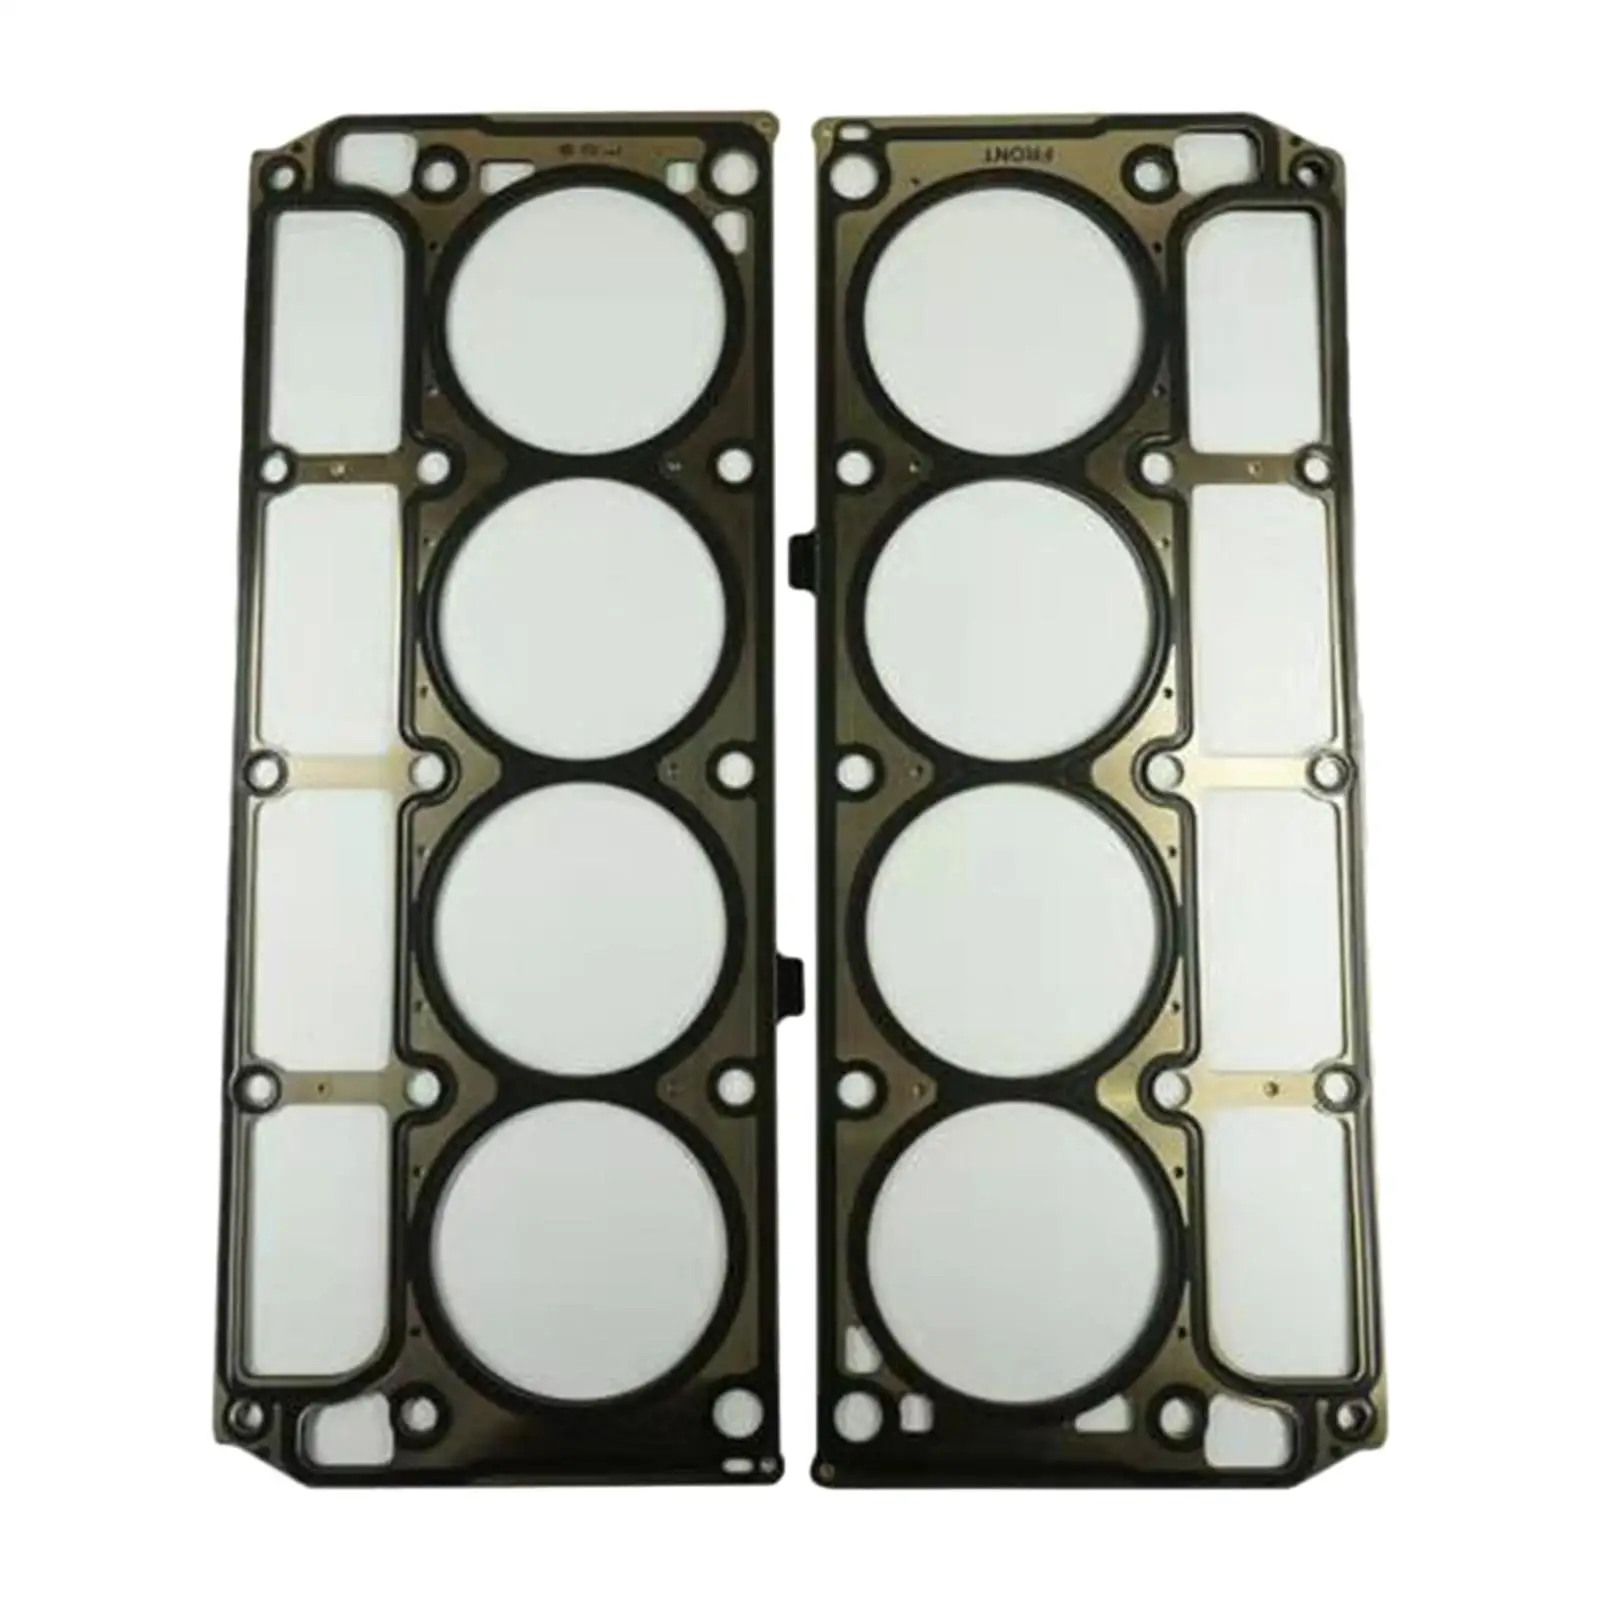 Car LS9 Cylinder Head Gaskets 12622033 4.100 Bore Gaskets Set Fit for  CTS, 2009-15 6.0L & 6.2L, for LS9 Lsa Engines Btr22033